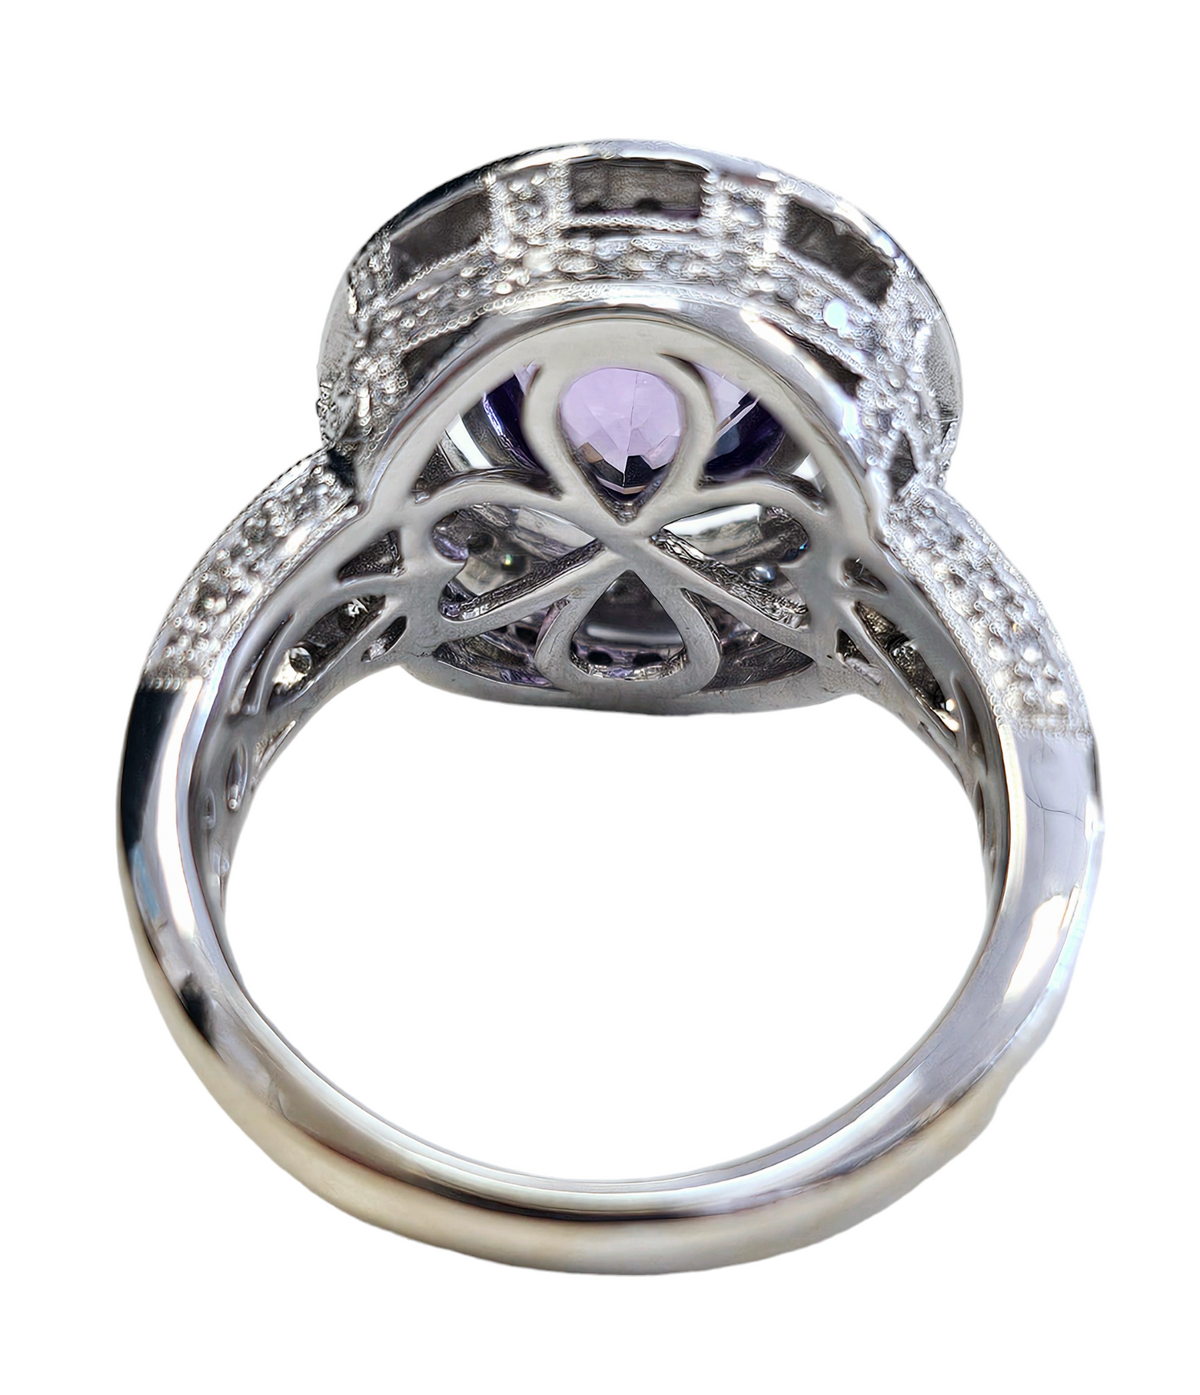 Bezel Set Oval Cut Amethyst and Diamond Halo Ring made in 18-Karat White Gold